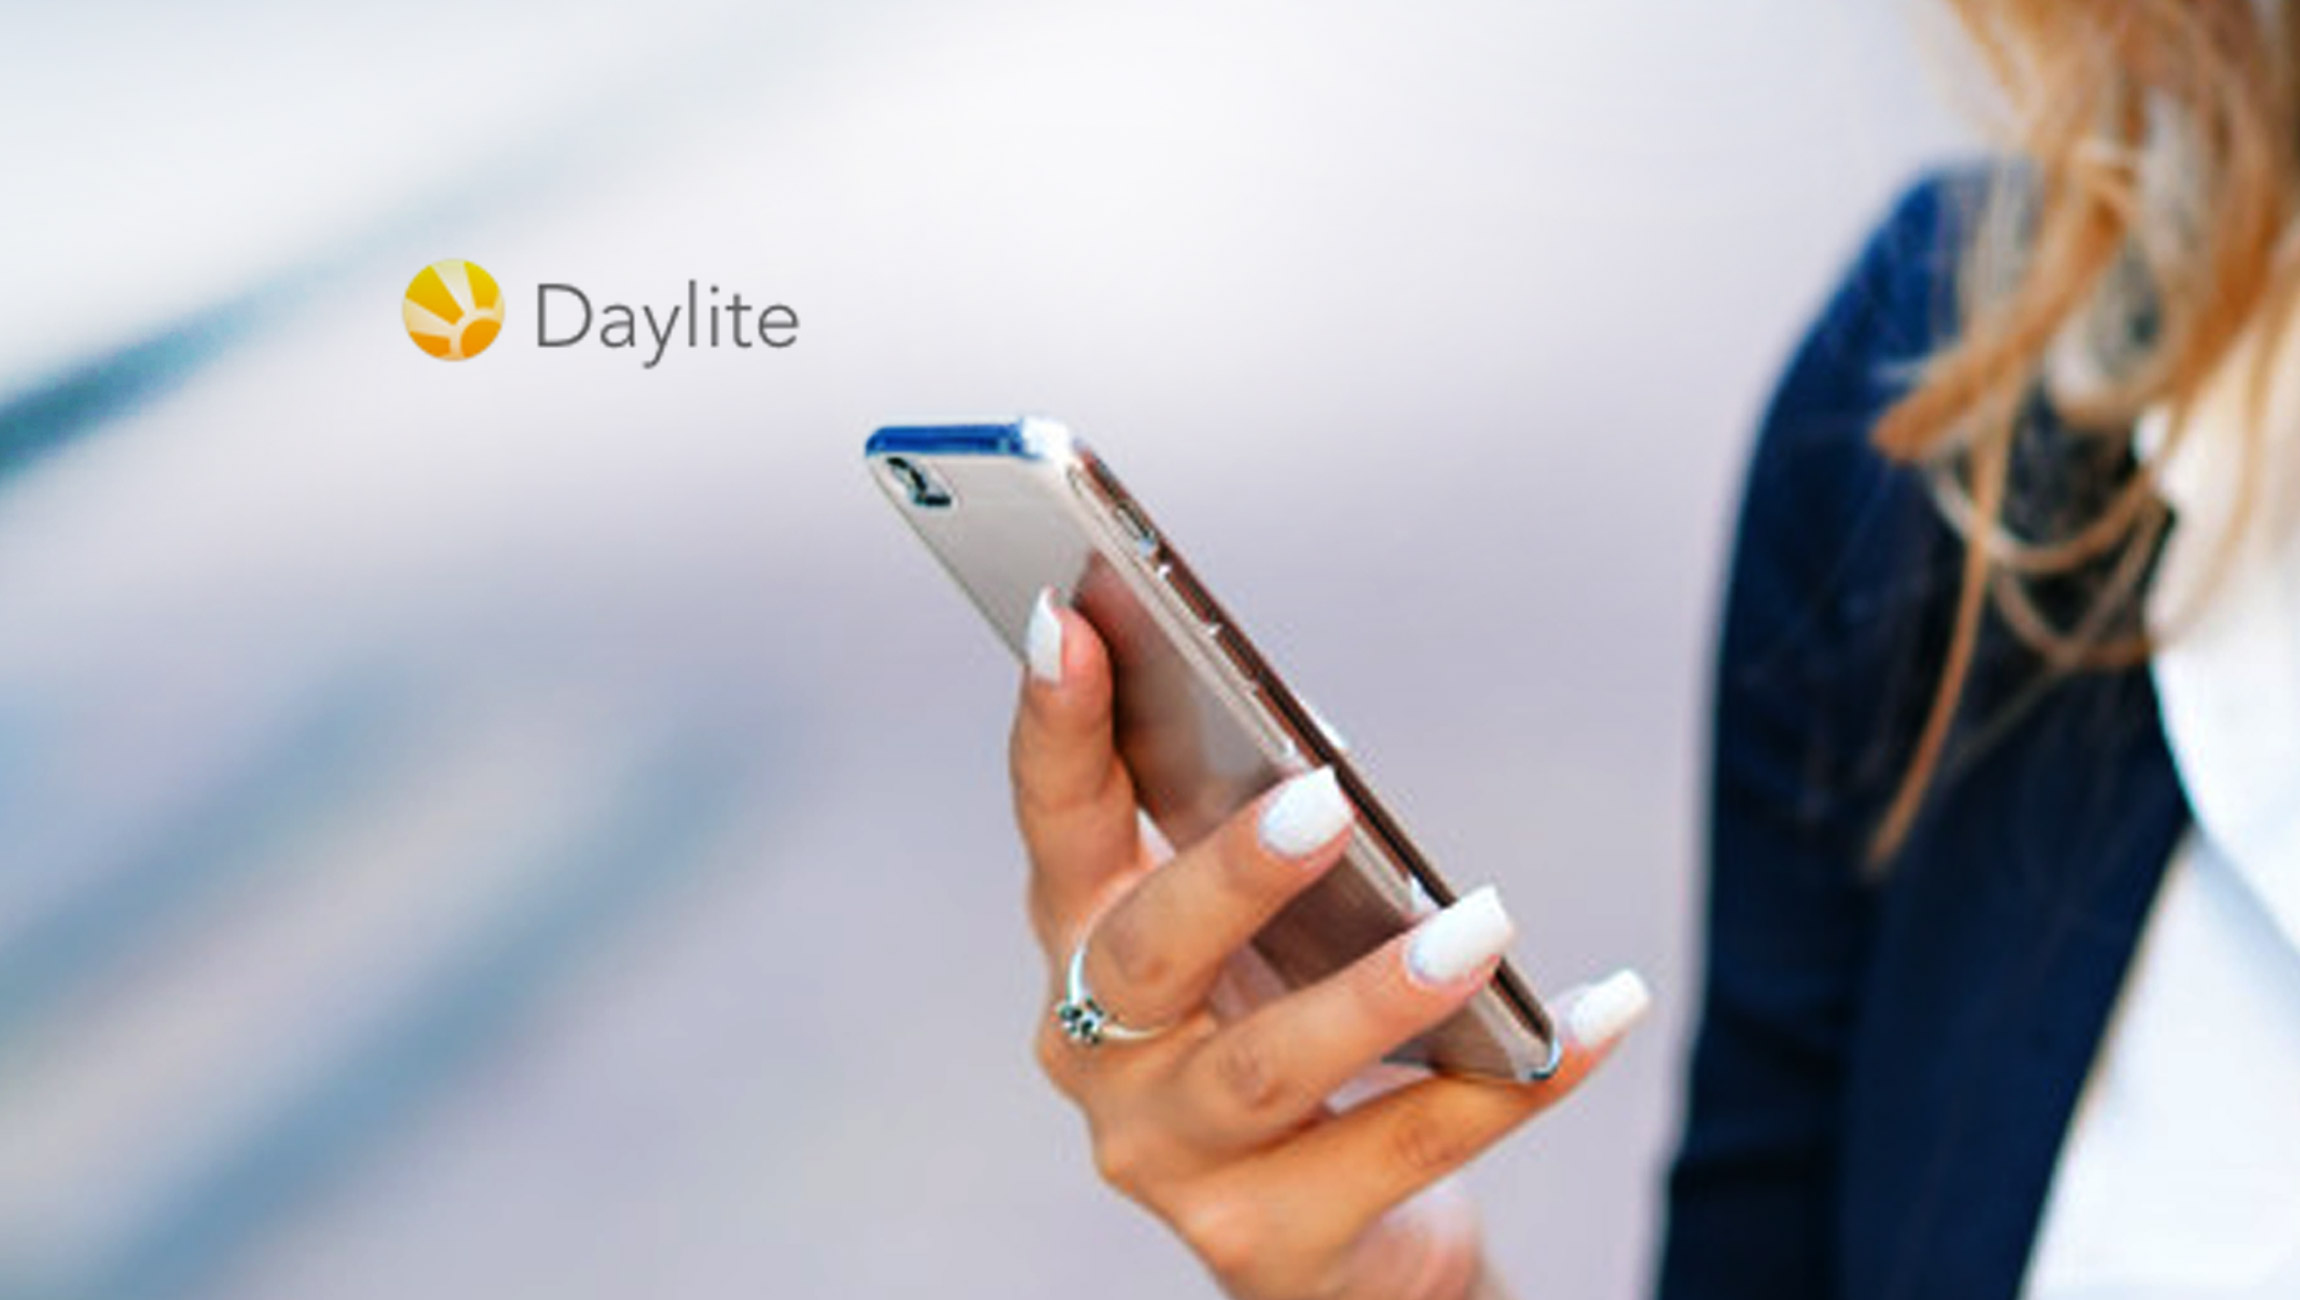 Marketcircle Introduces its New ‘Projects Board’ Feature in the Daylite App to Help Small Businesses Accelerate Projects from Start to Finish